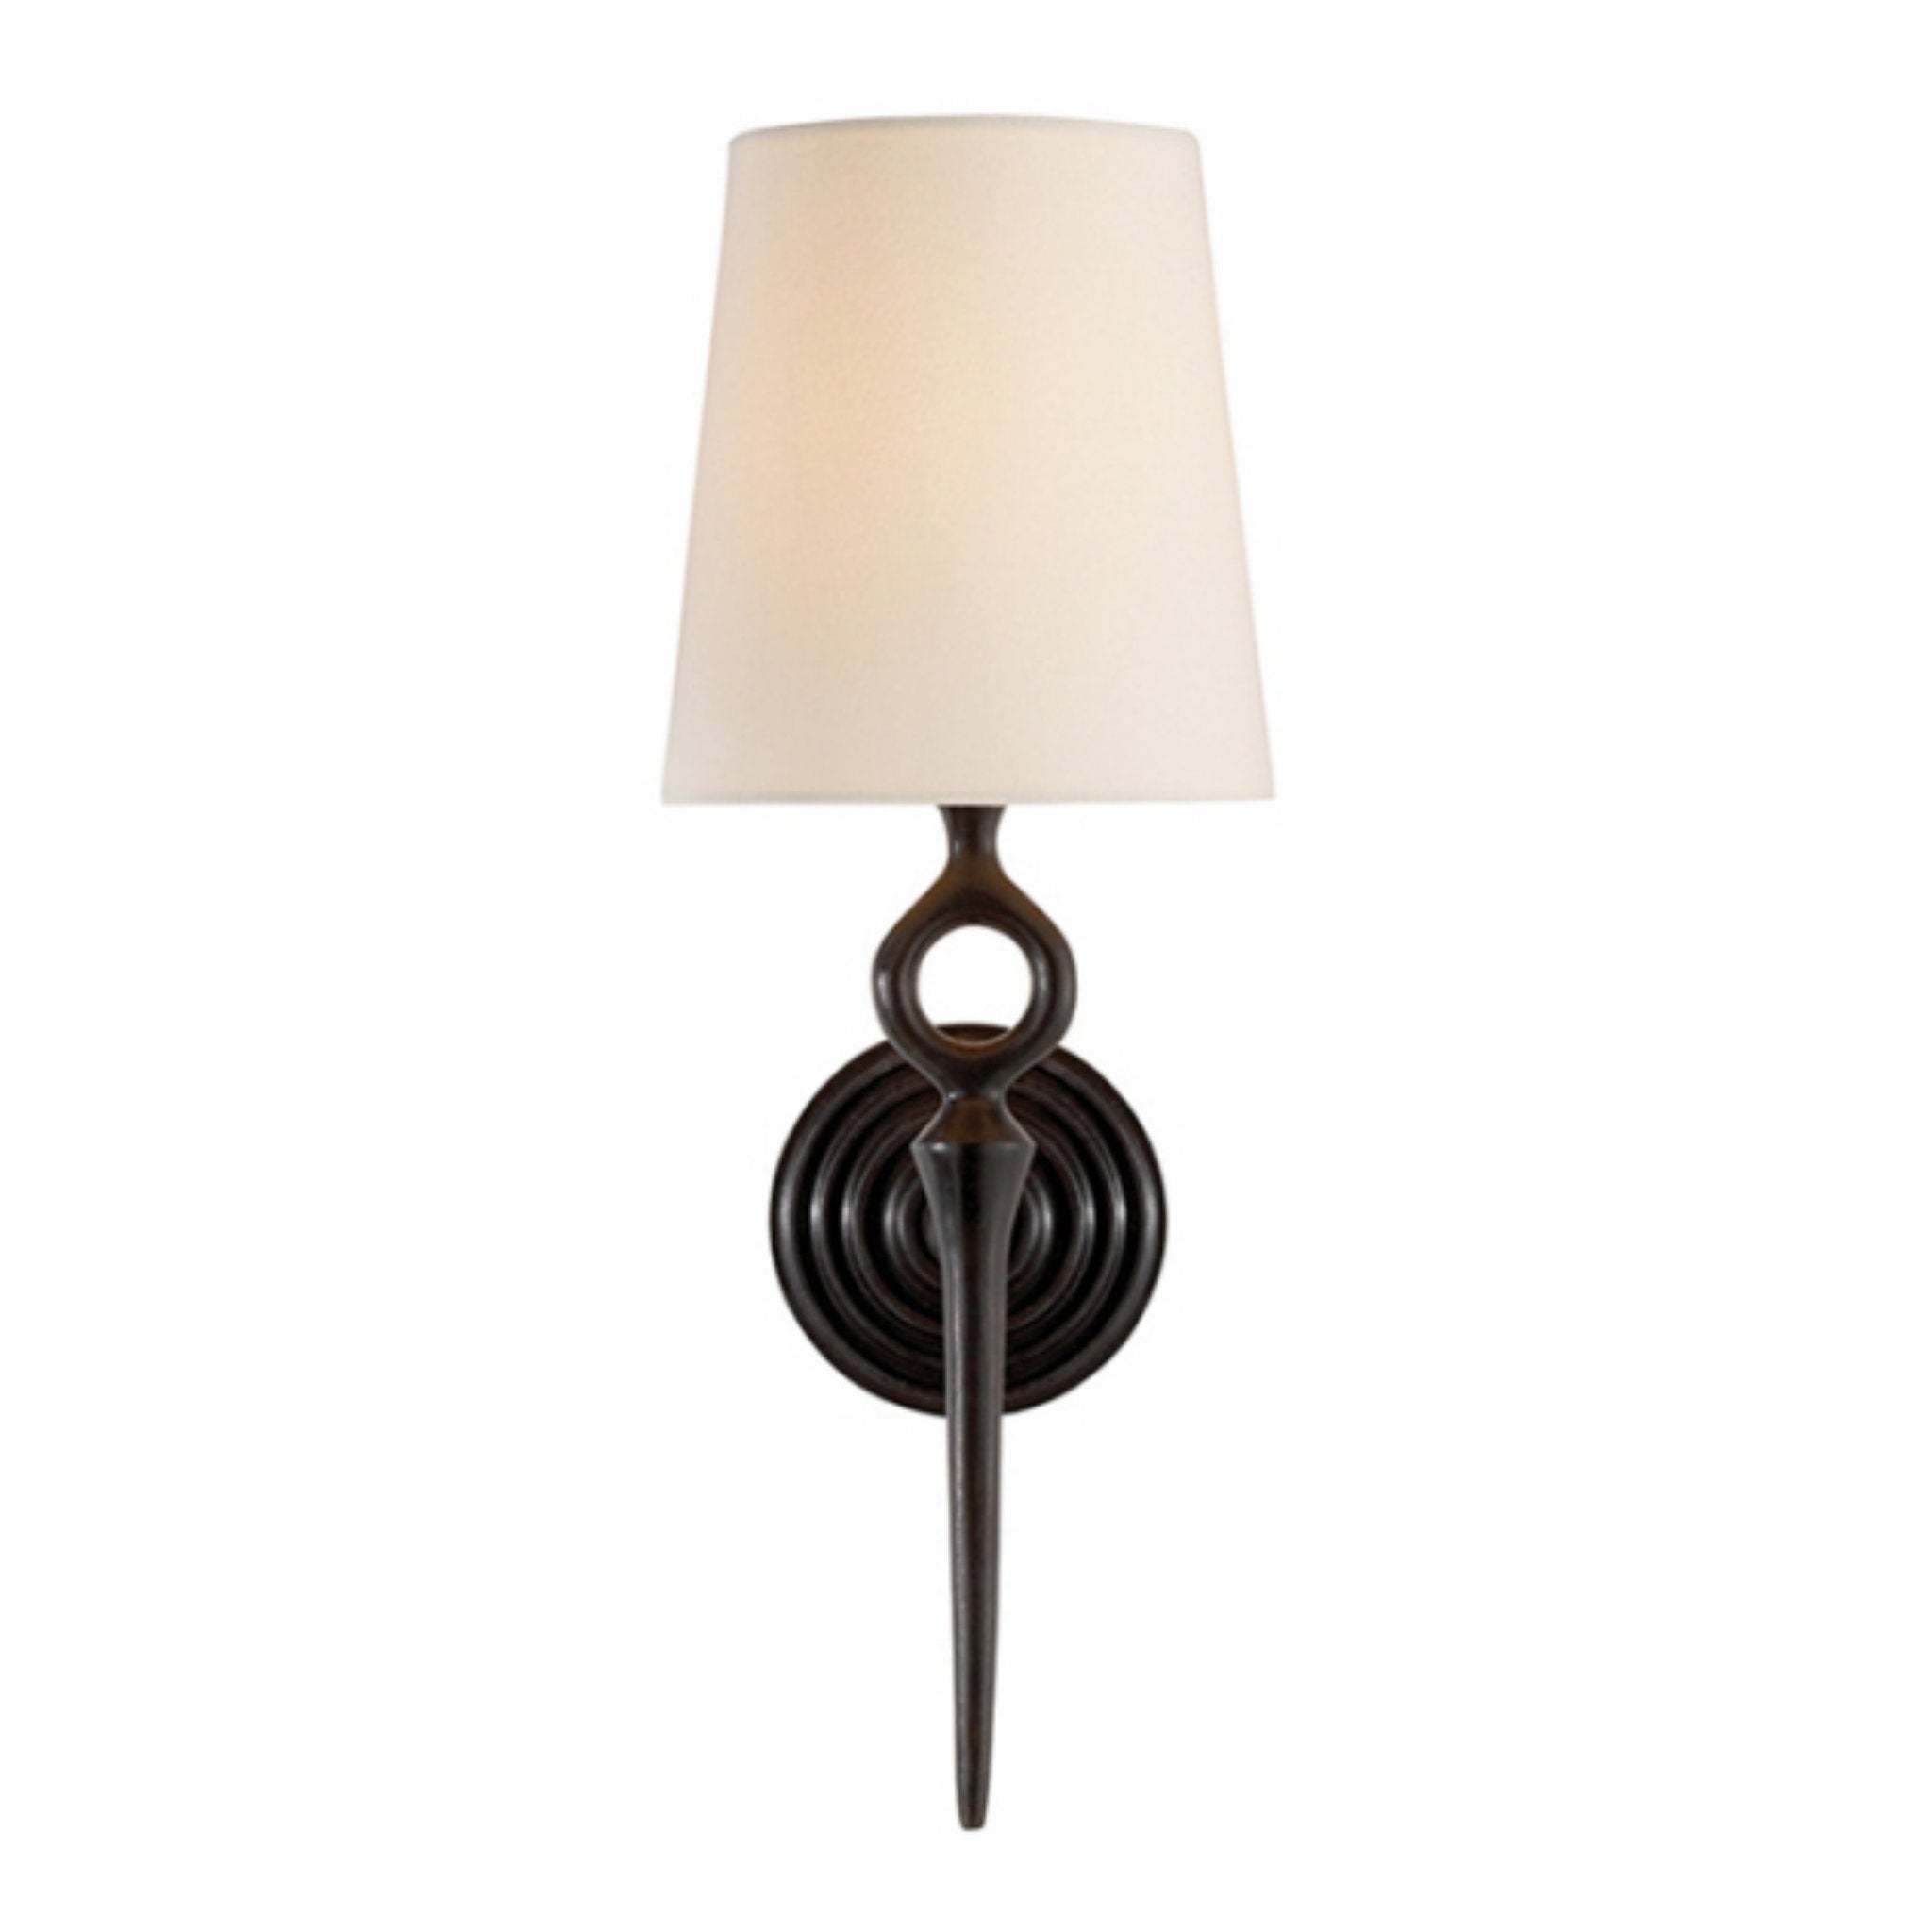 AERIN Bristol Single Sconce in Aged Iron with Linen Shade